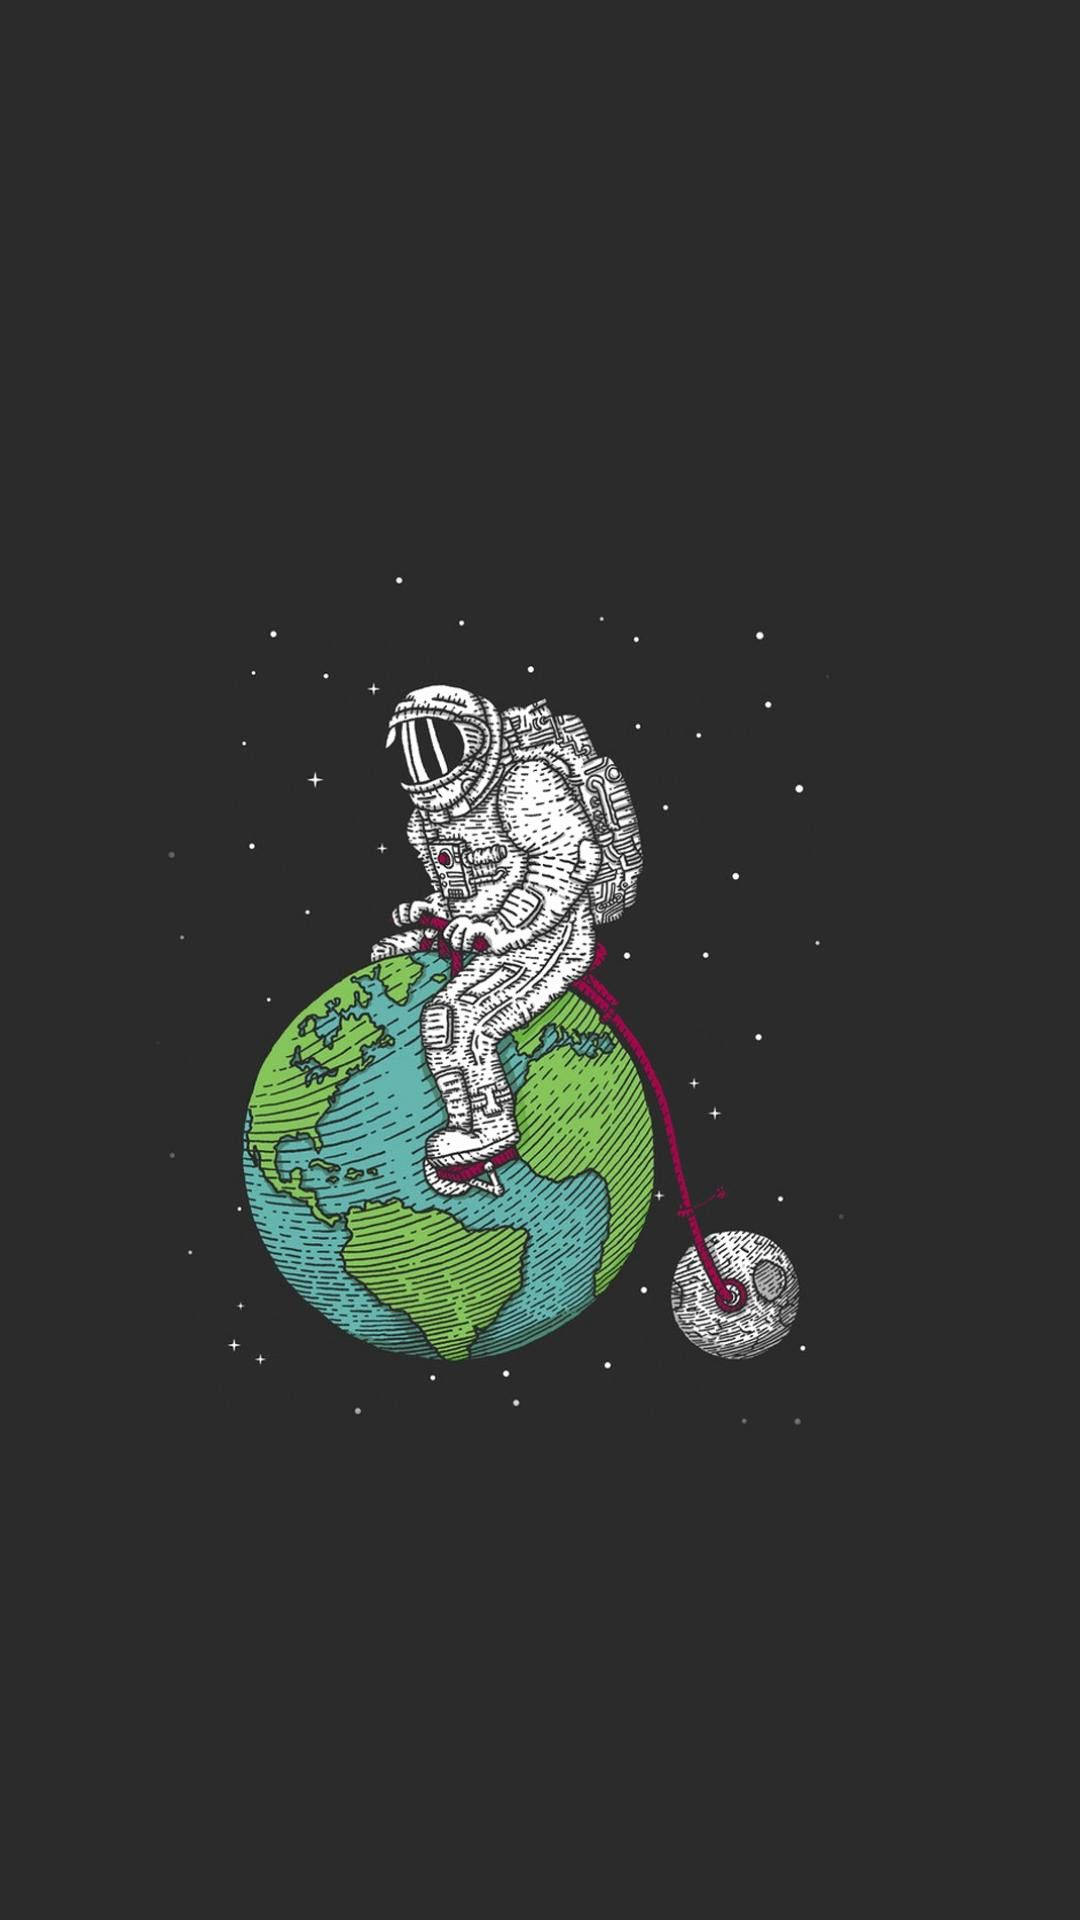 Clever Astronaut Cycling